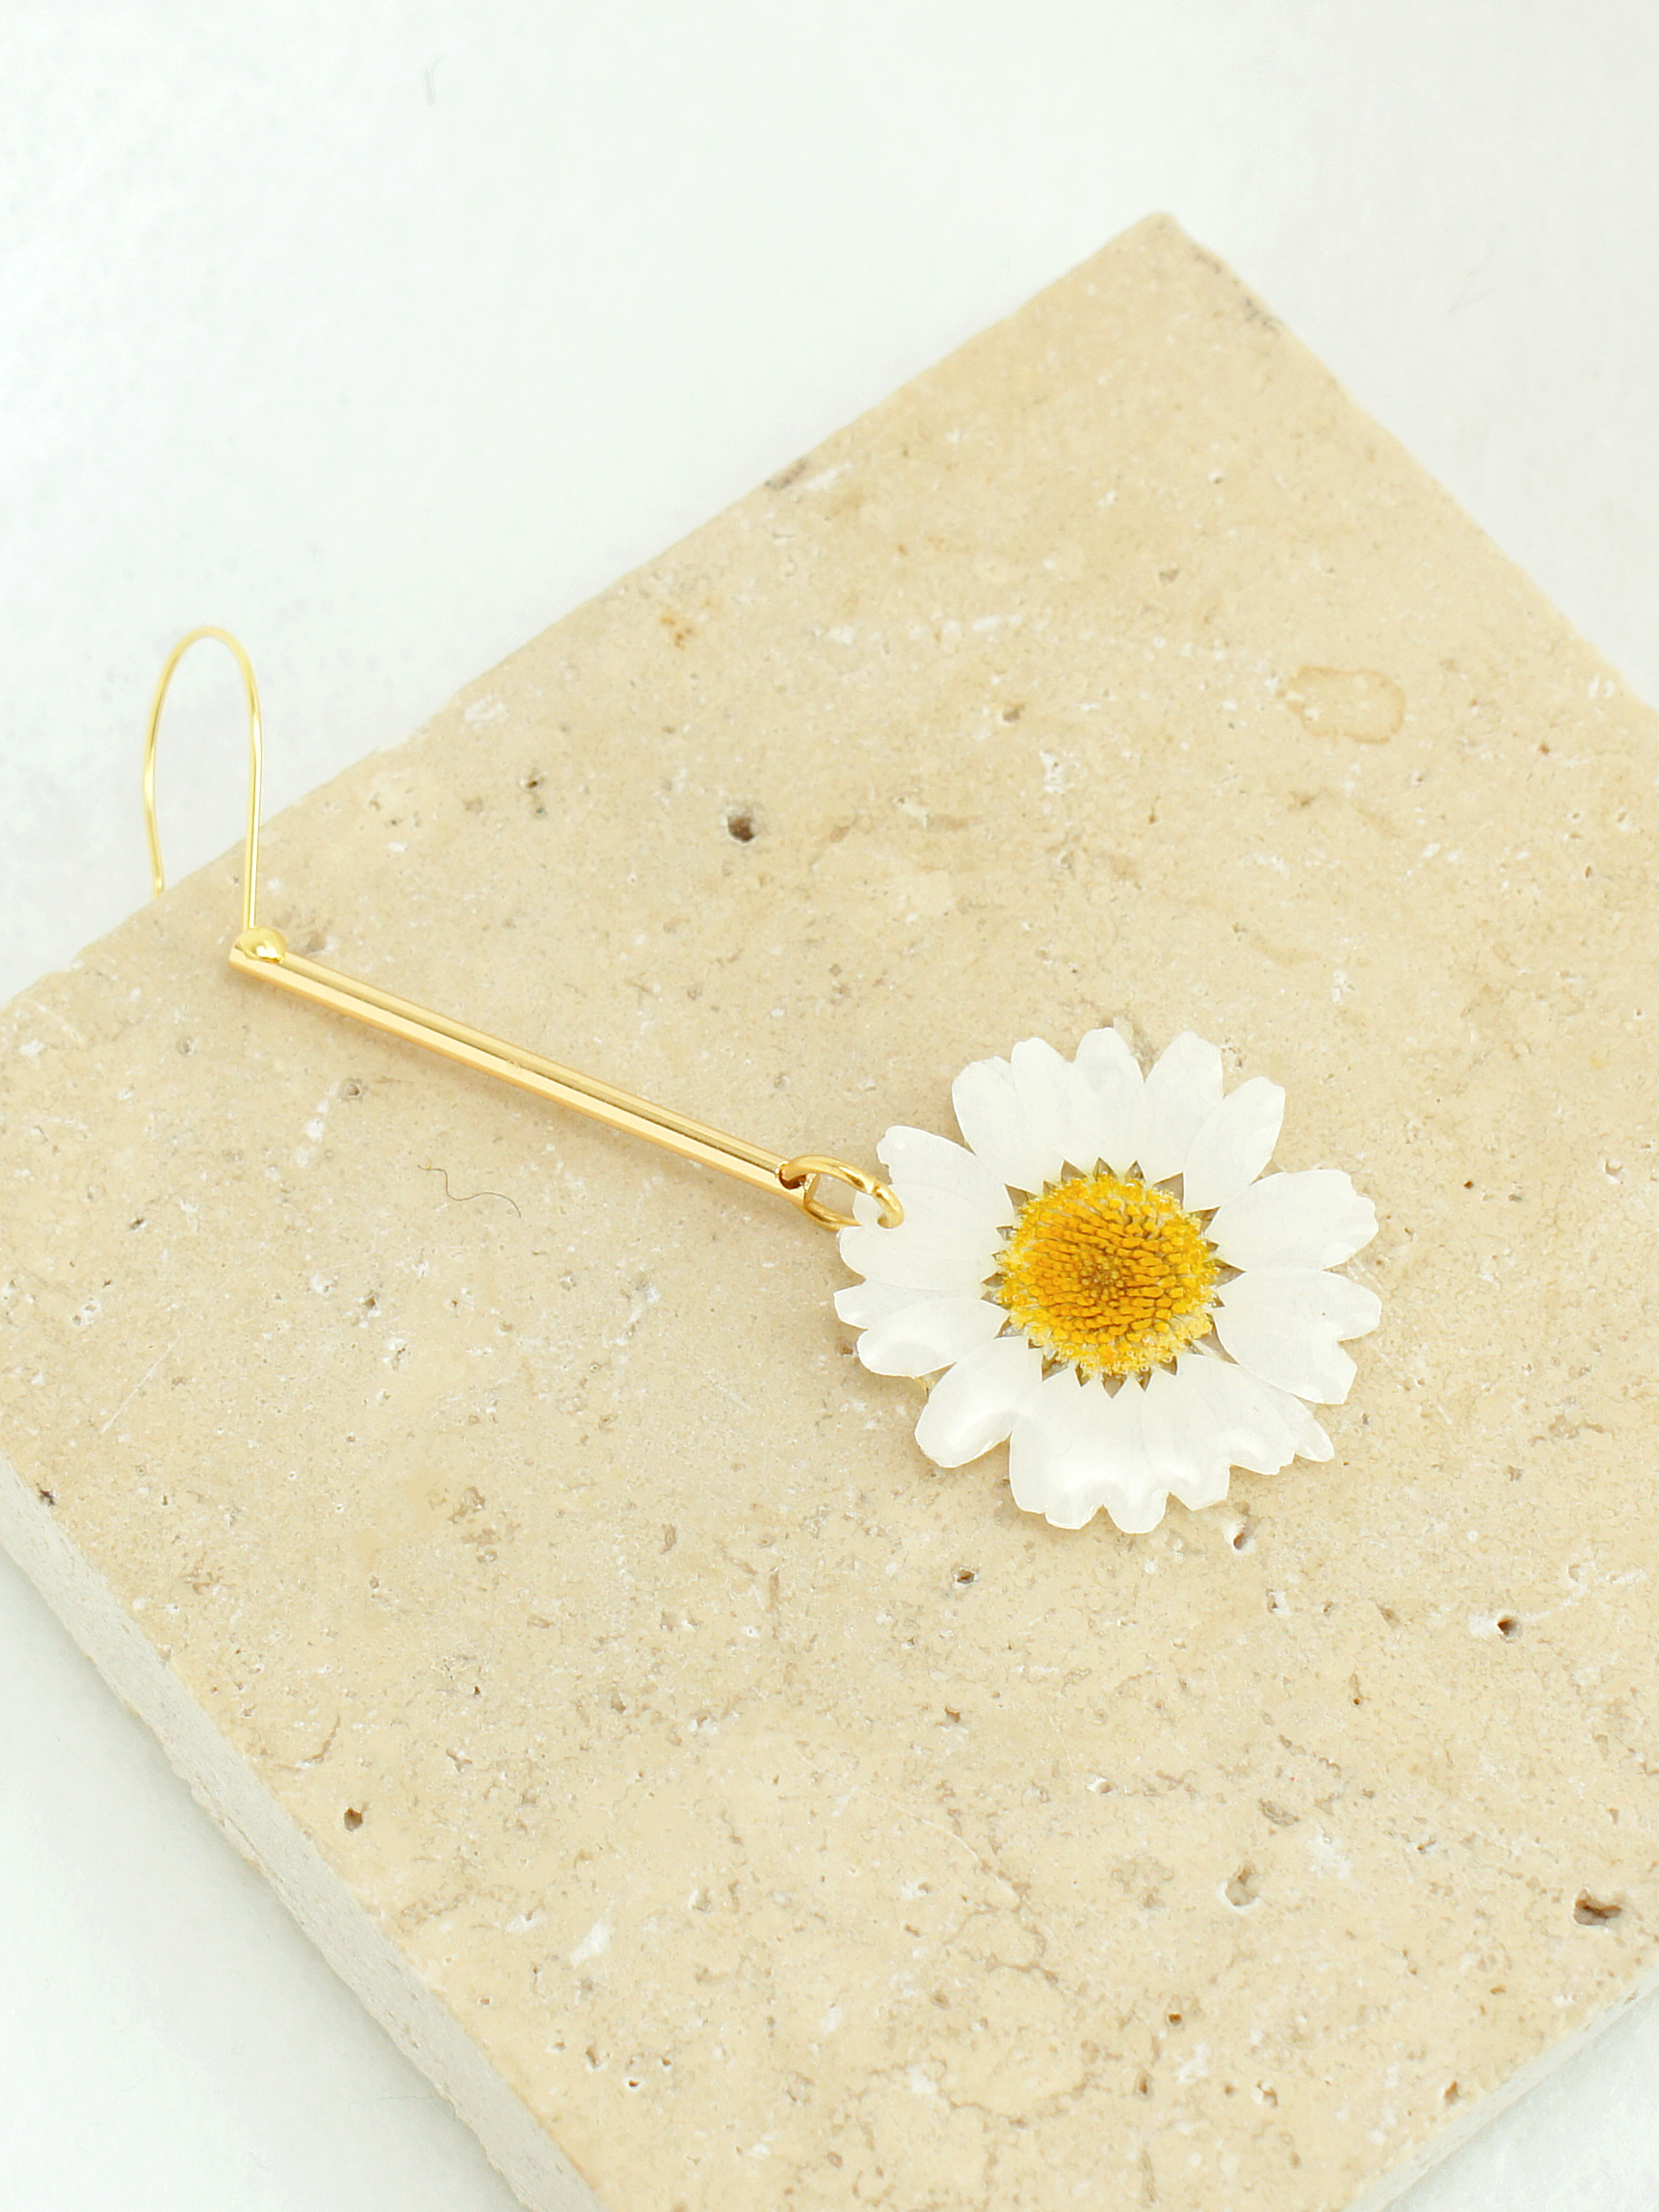 *REAL FLOWER* English Daisy Drop Earrings with 18k Gold Vermeil Hooks